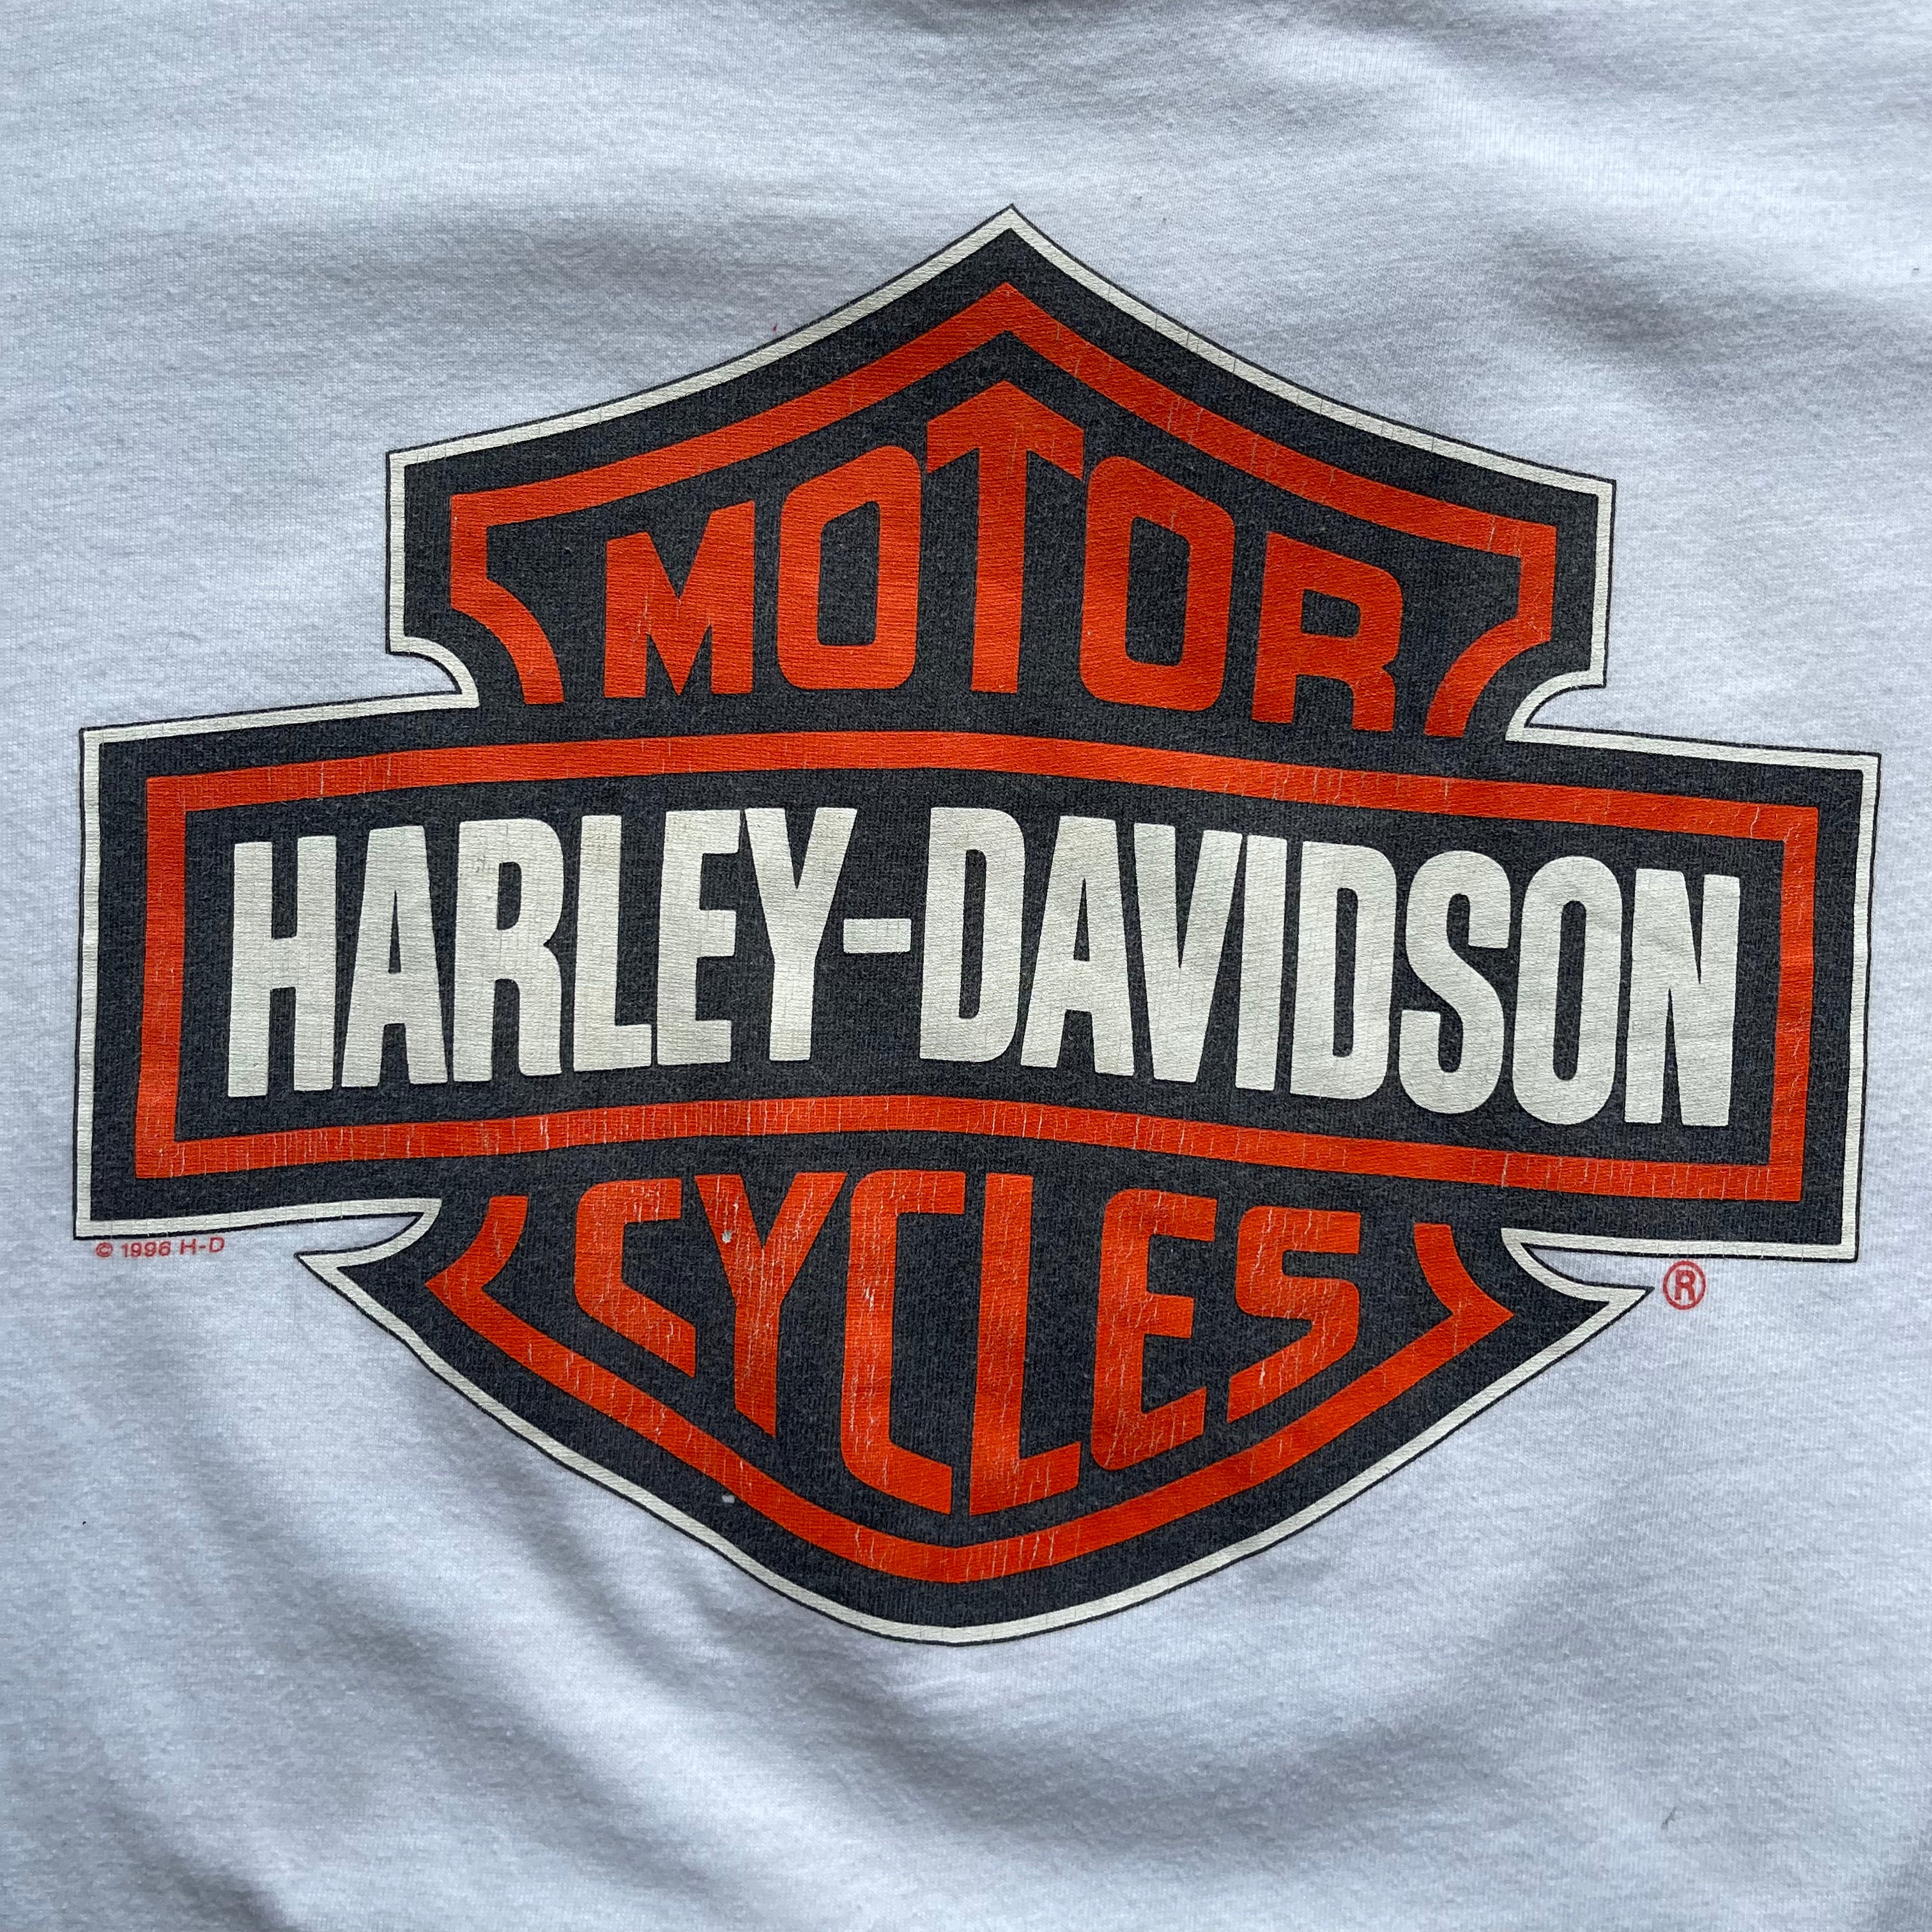 Harley Davidson Beaumont, Texas Made in USA